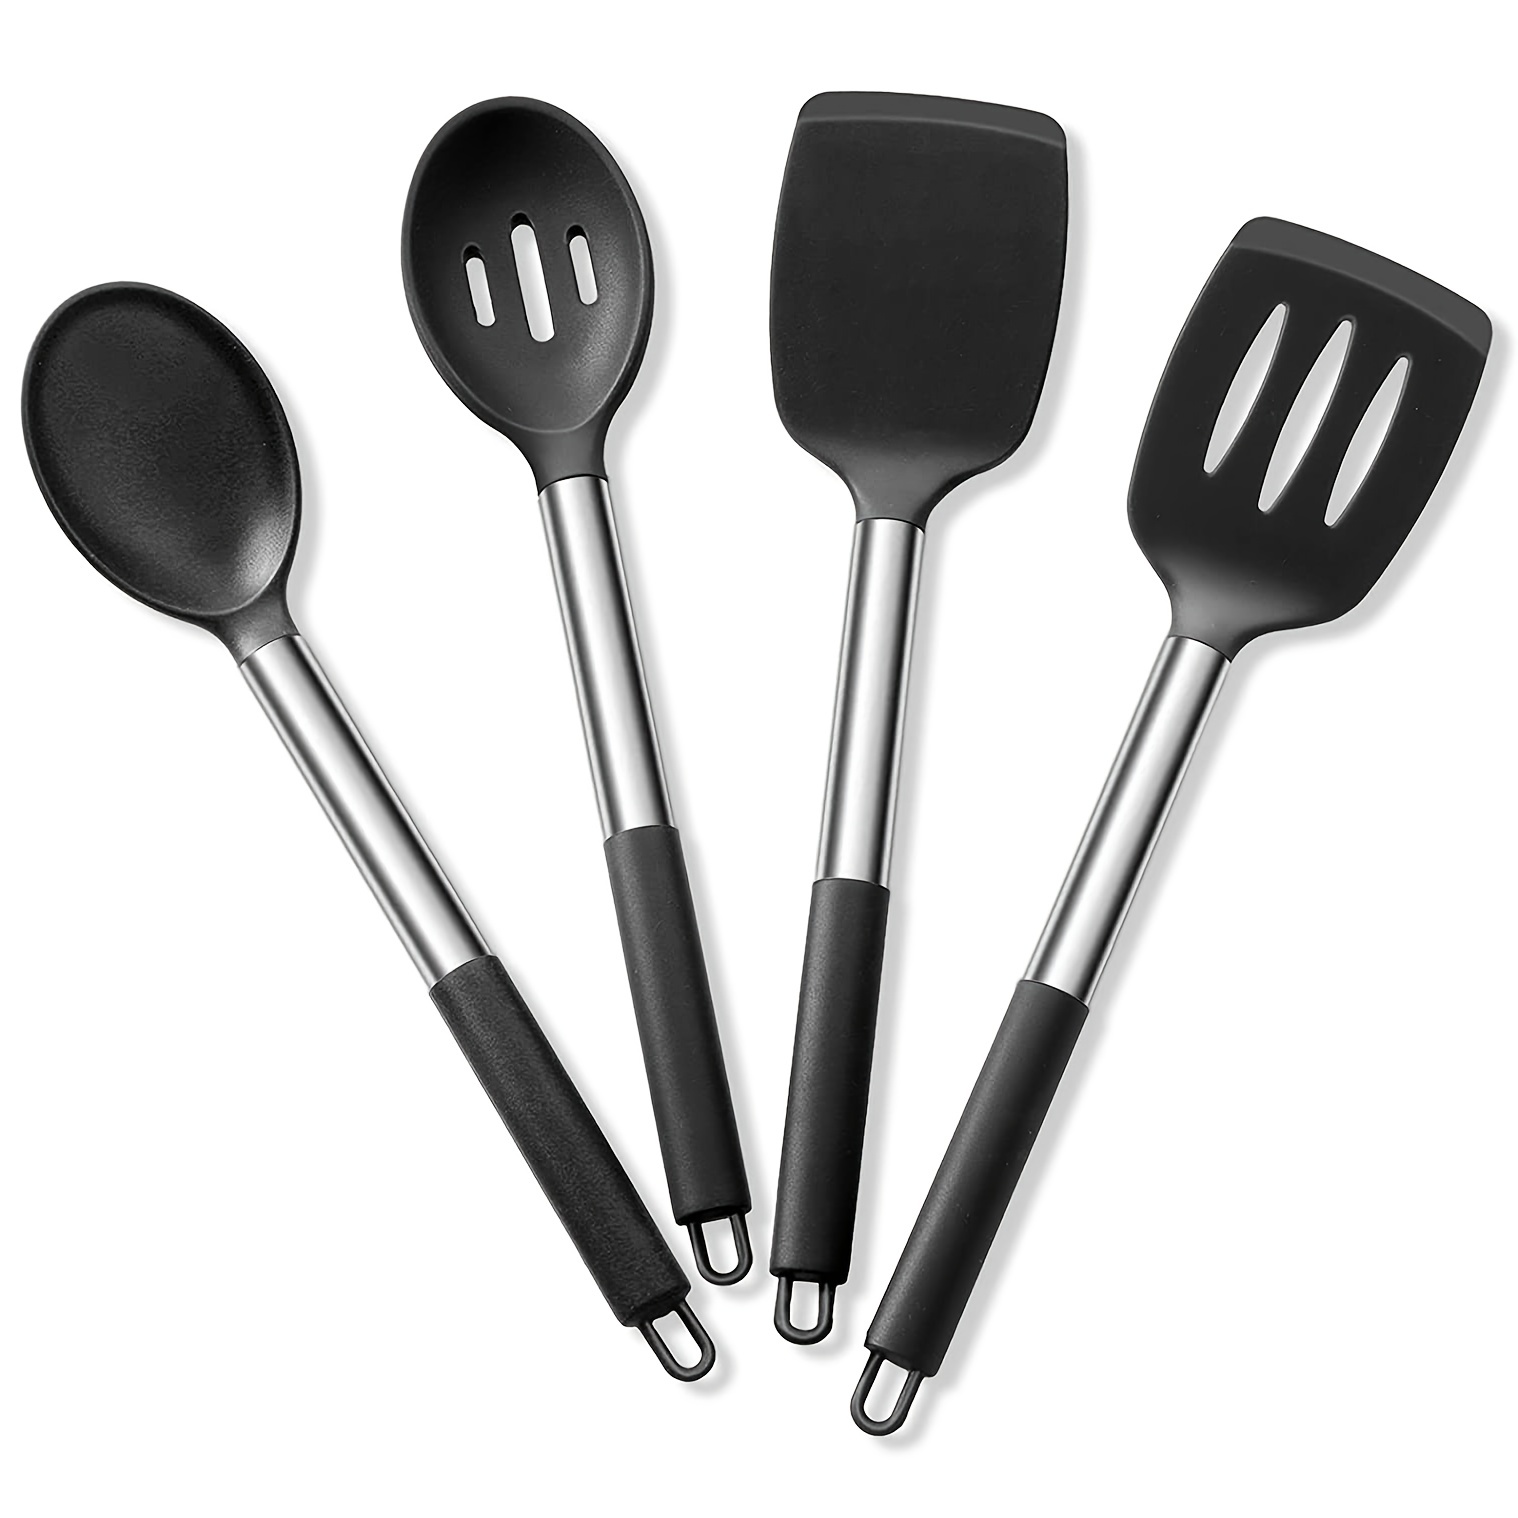 Silicone Kitchen Utensils Set Cooking Tools Spatulas,Slotted Spoon